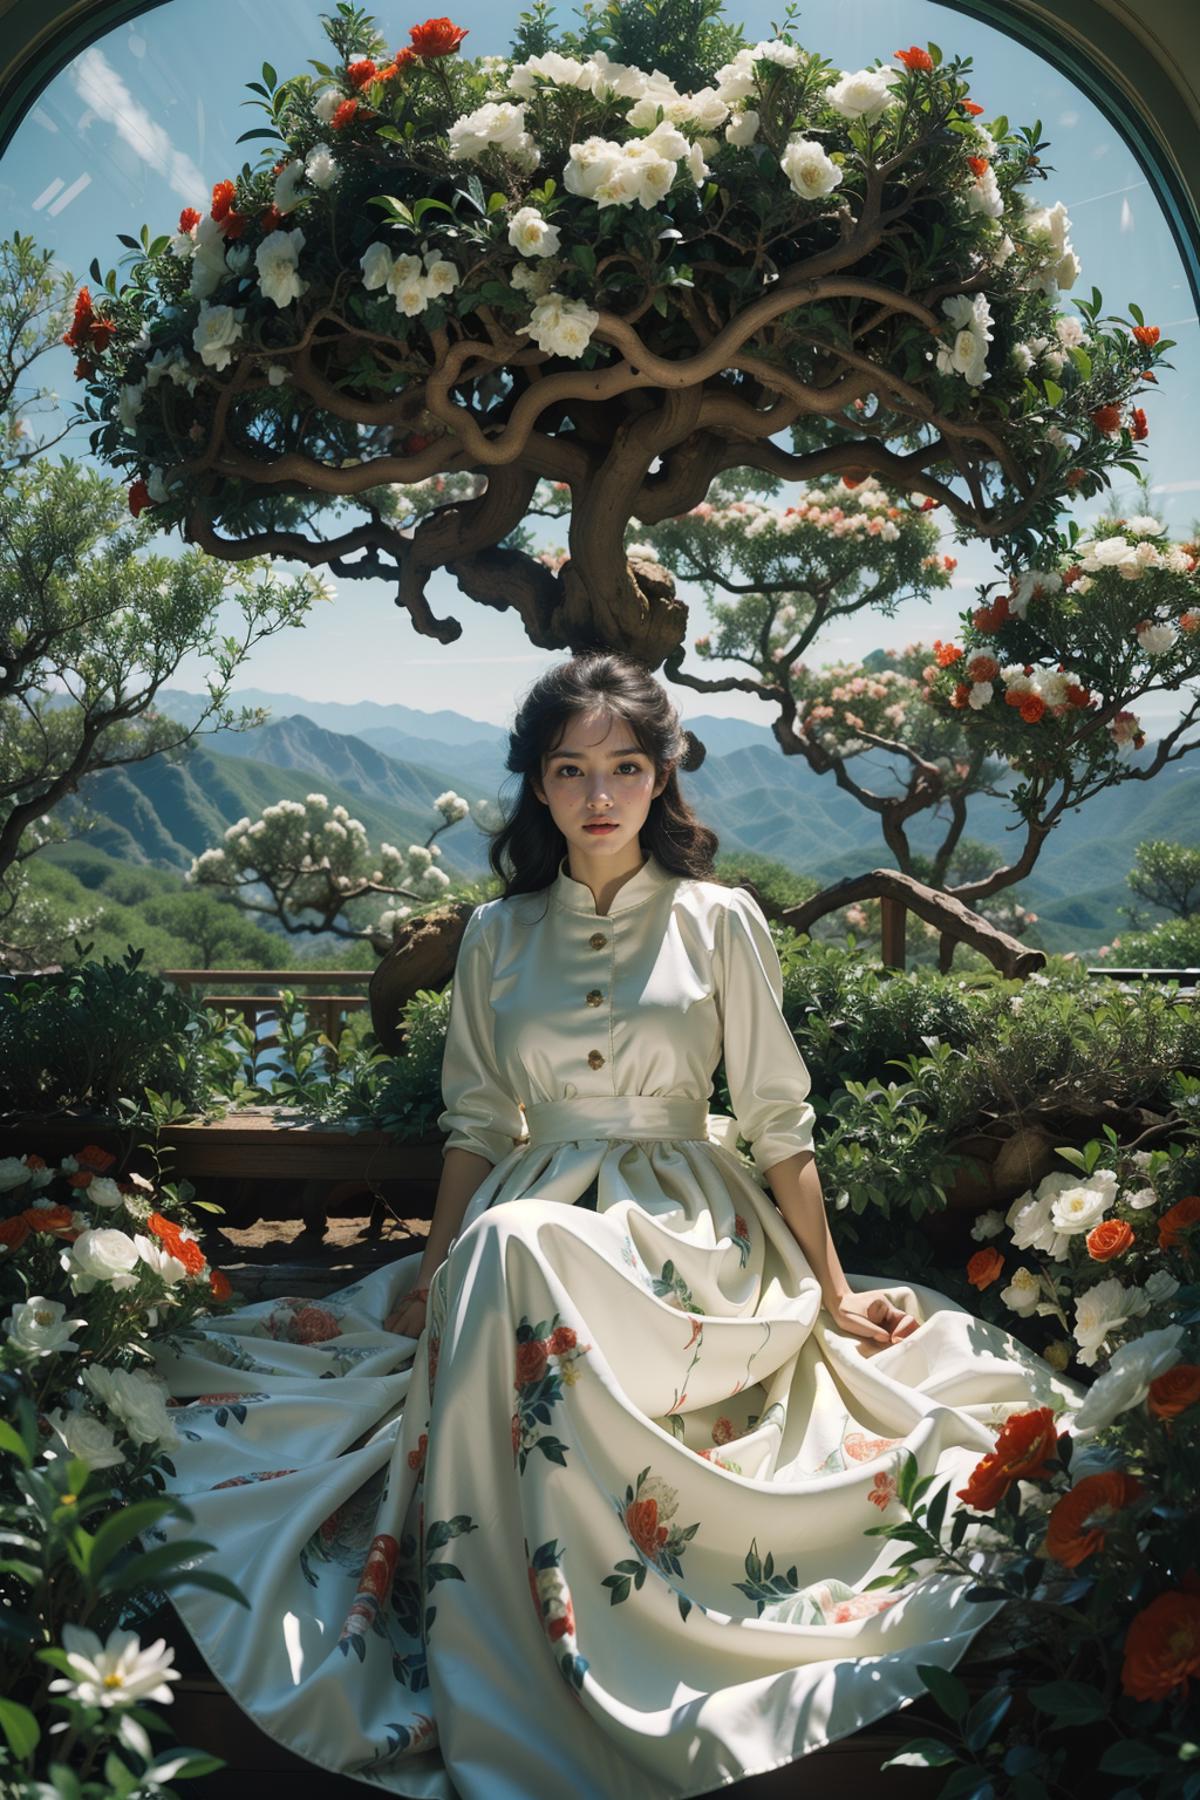 A Young Woman Sits Beneath a Tree with Flowers in a Garden.